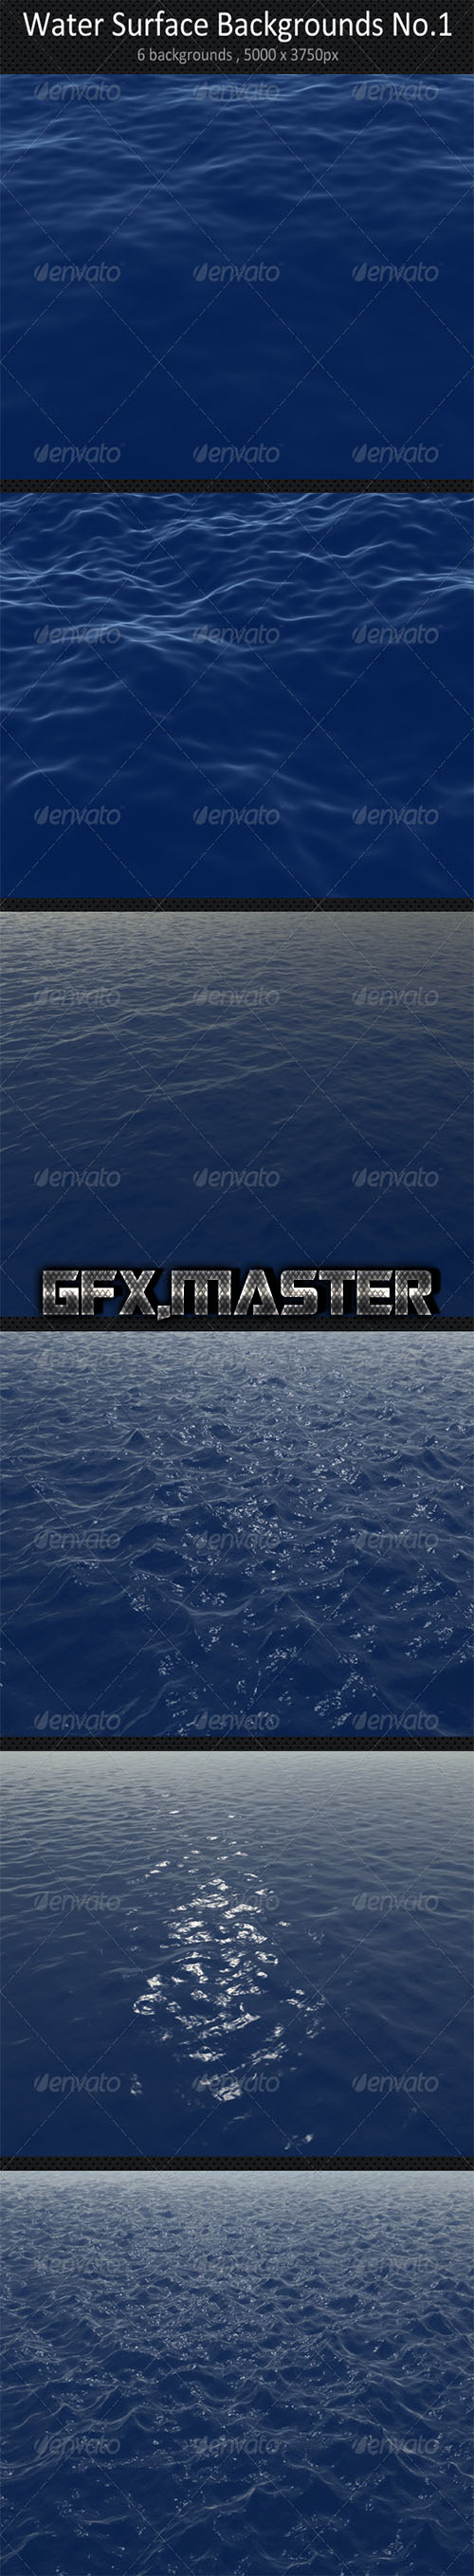 GraphicRiver - Water Surface Backgrounds No.1